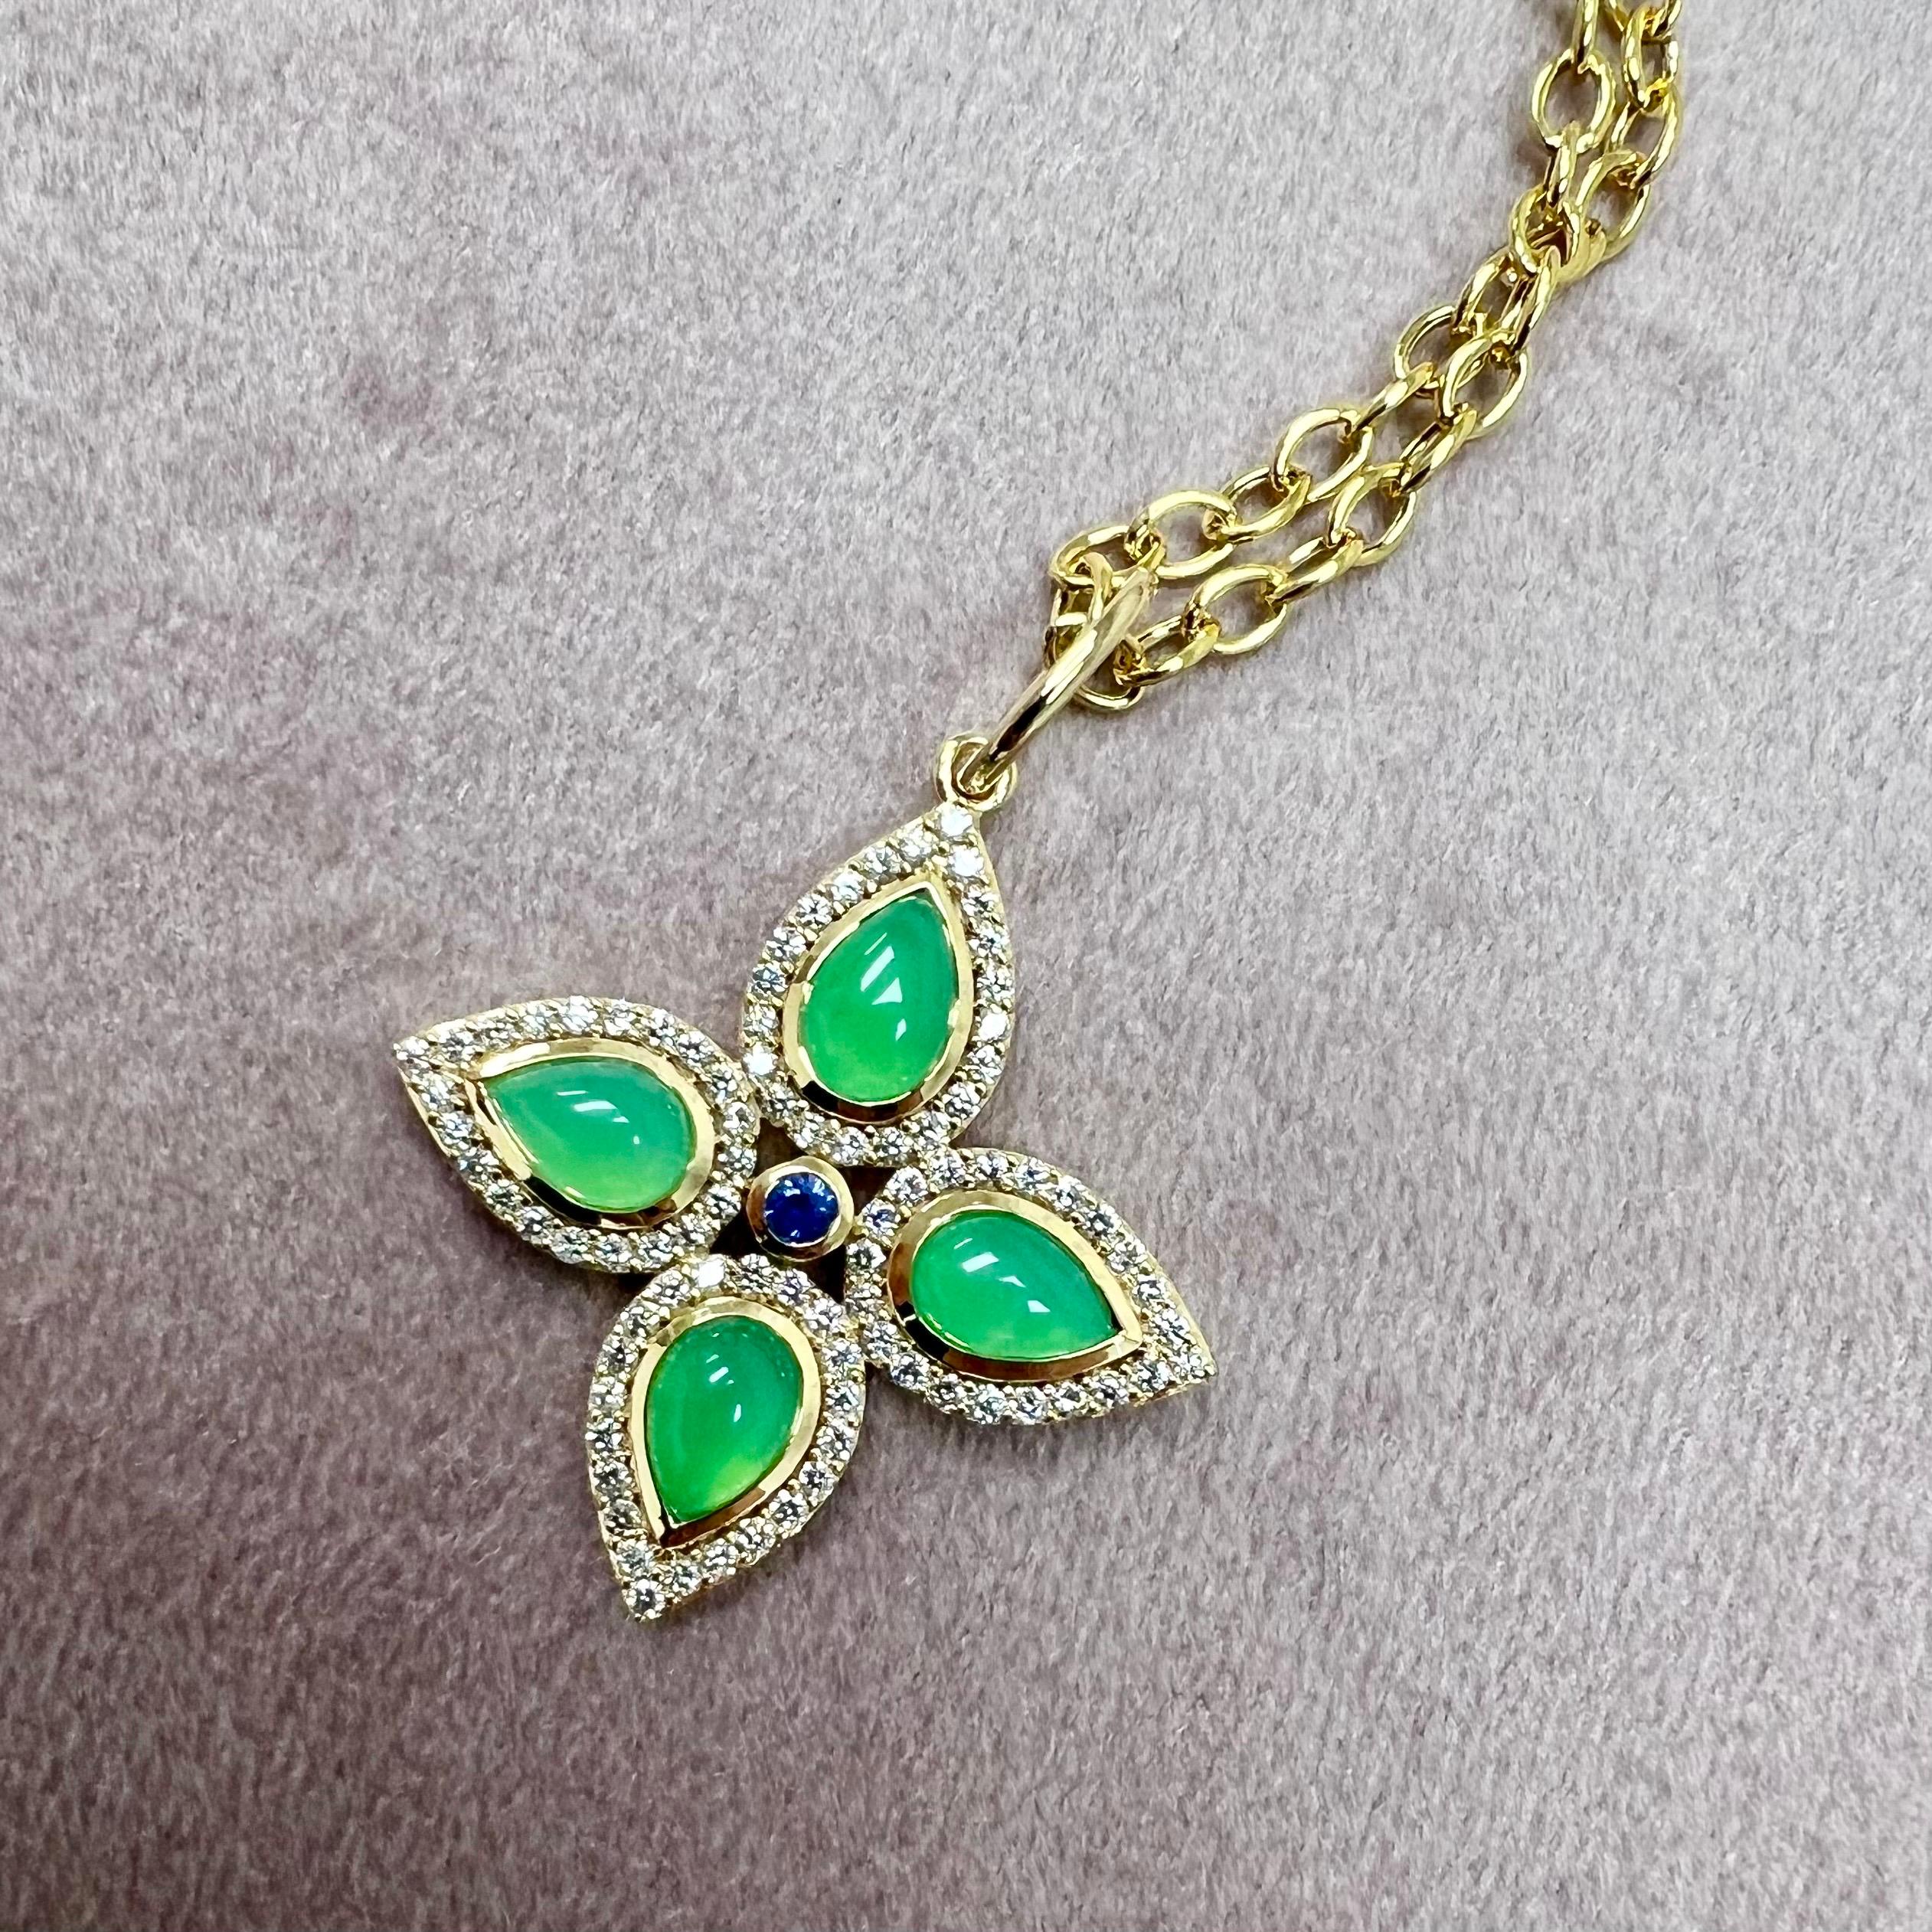 Created in 18 karat yellow gold
Chrysoprase 1.50 carats approx.
Blue Sapphire 0.05 carat approx.
Diamonds 0.45 carat approx.
Chain sold separately



 About the Designers ~ Dharmesh & Namrata

Drawing inspiration from little things, Dharmesh &